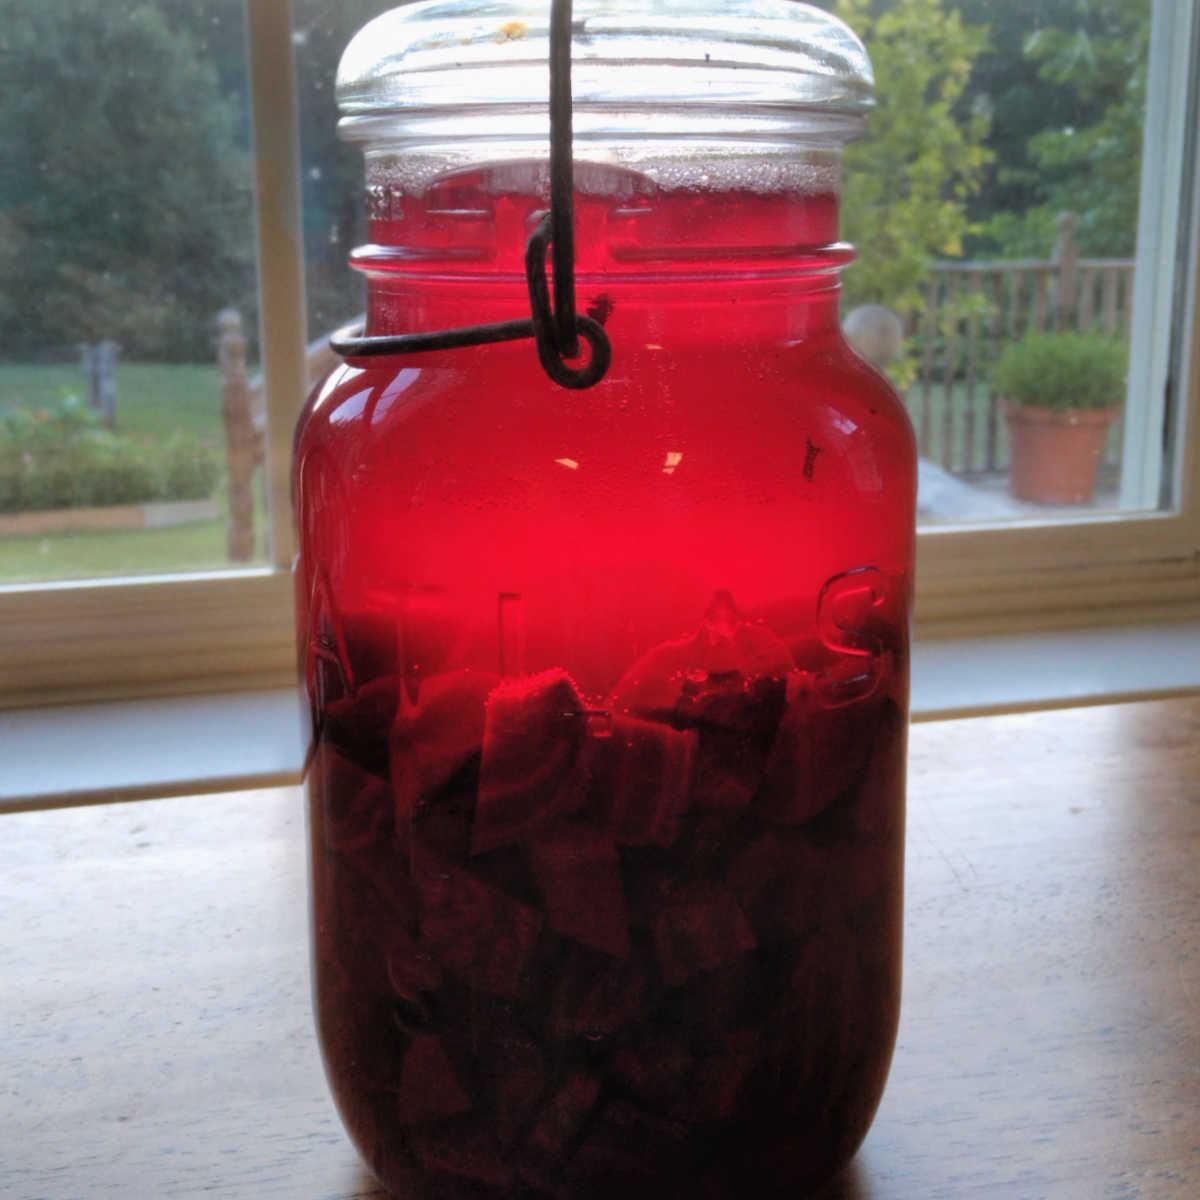 beet kvass in a canning jar on the kitchen table